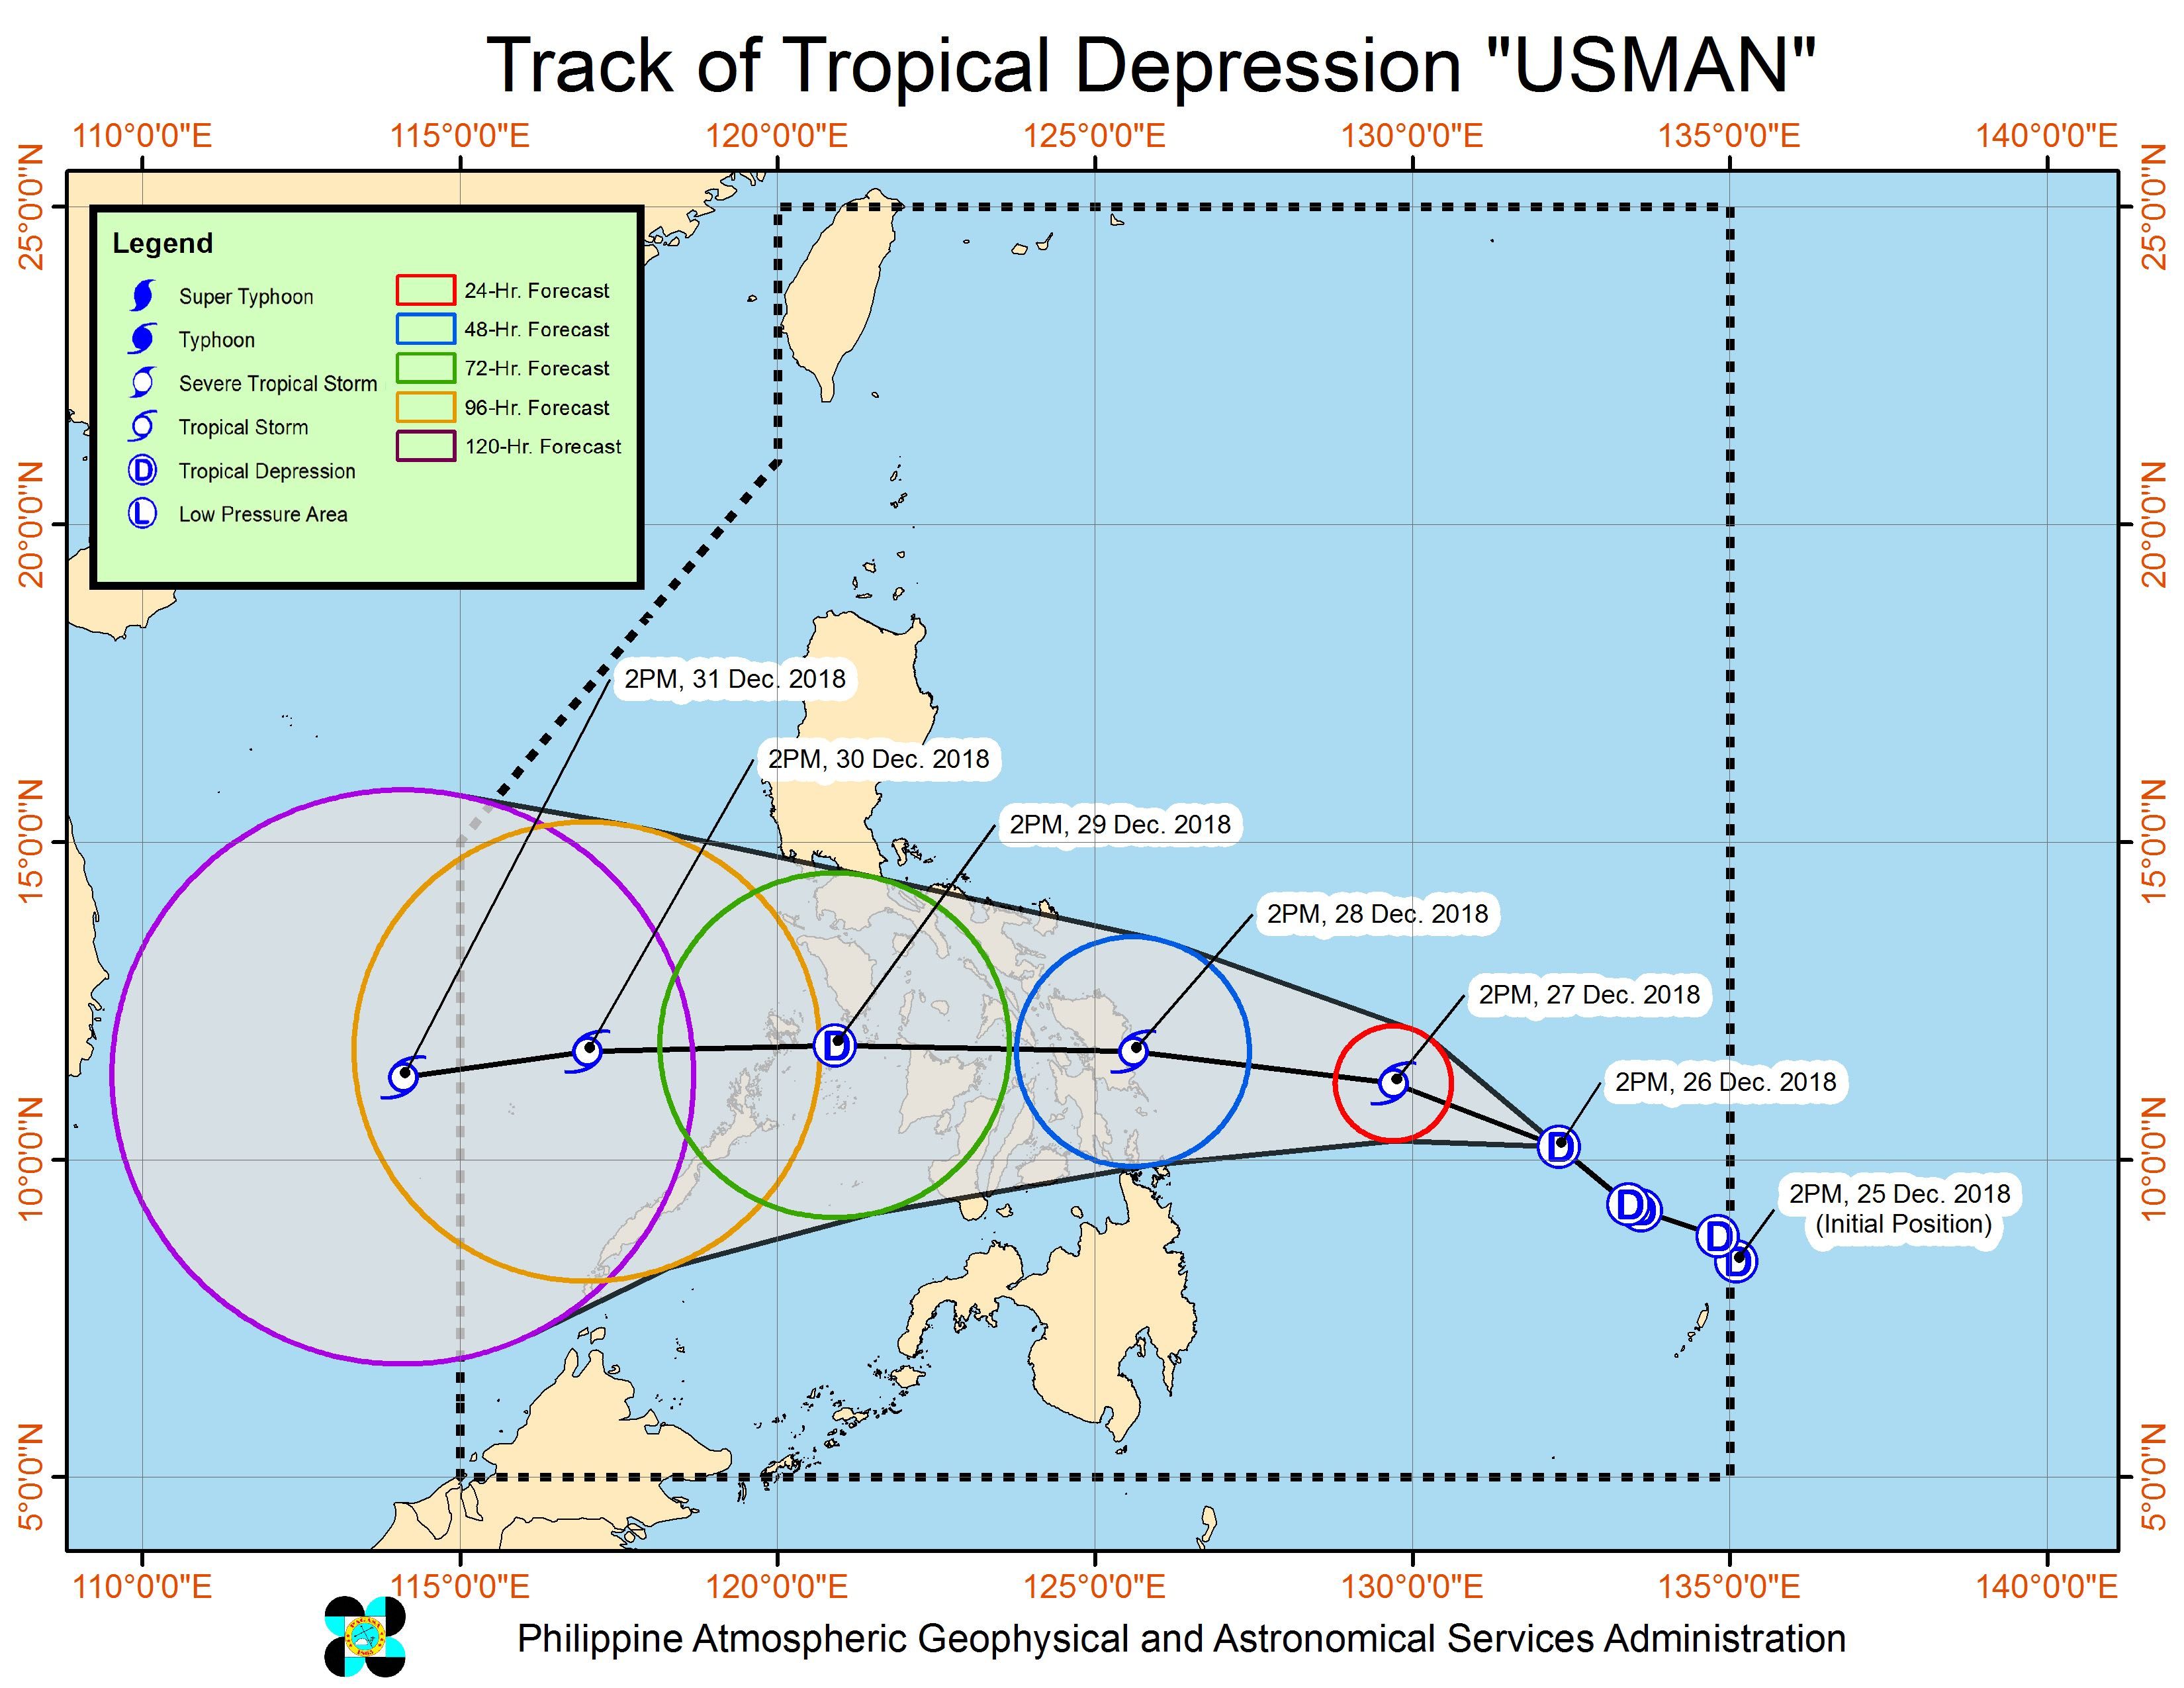 Forecast track of Tropical Depression Usman as of December 26, 2018, 5 pm. Image from PAGASA 